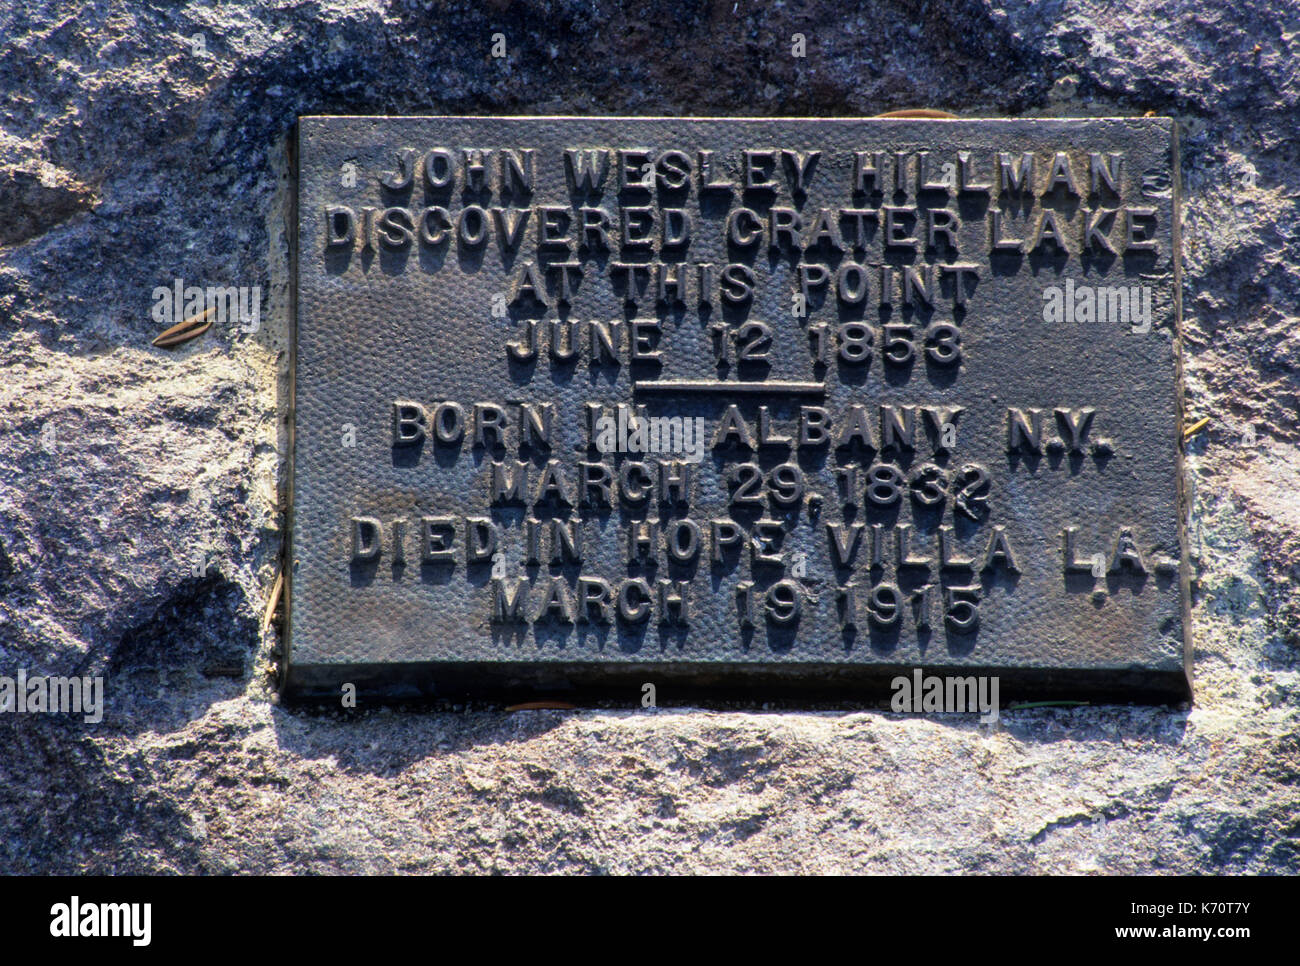 Commemorative plaque on Discovery Trail, Crater Lake National Park, Oregon Stock Photo